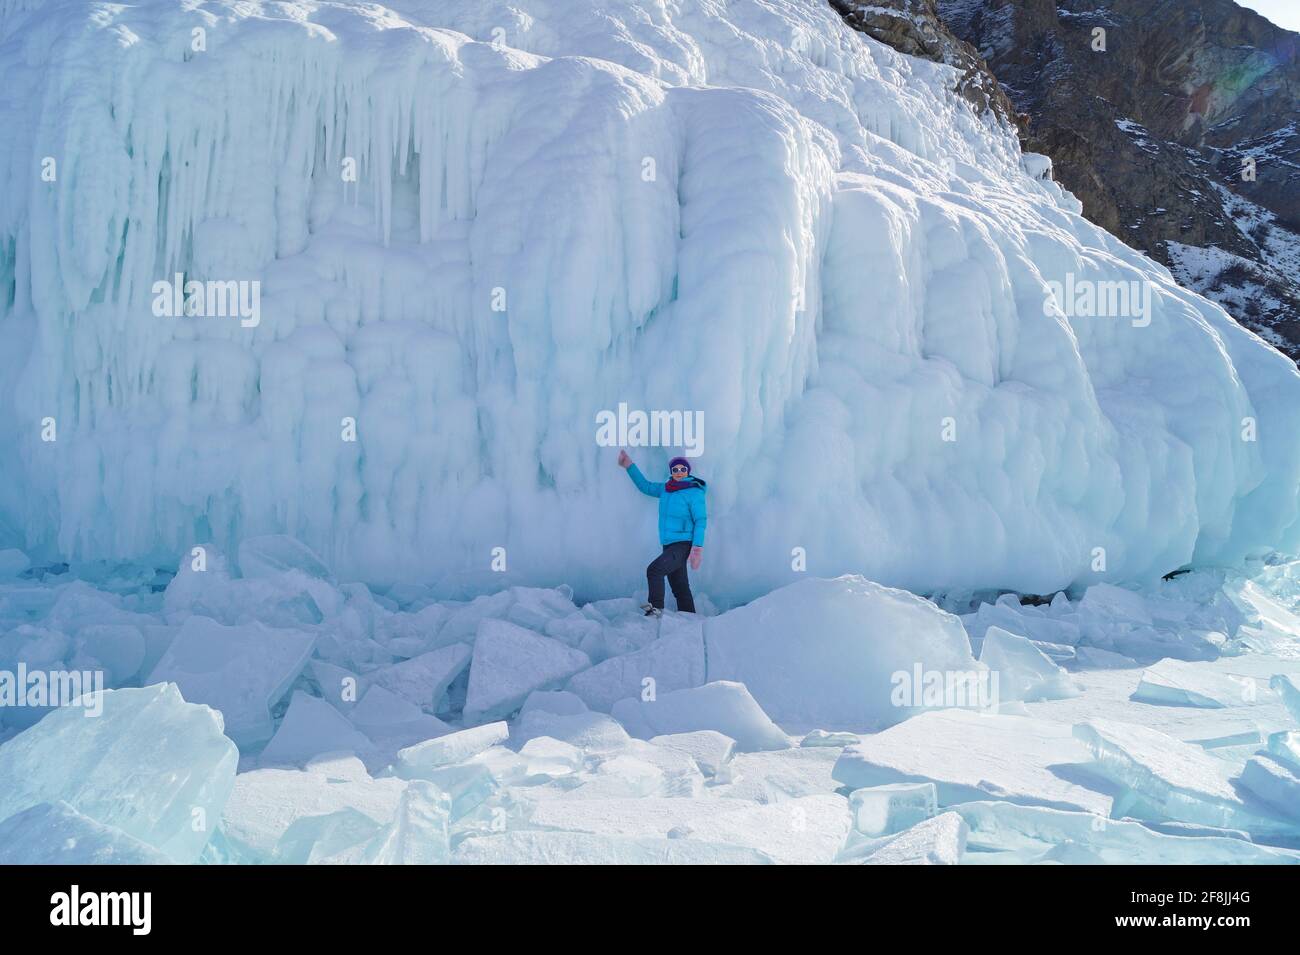 A woman of 35-40 years old stands on the background of the icy Stock Photo